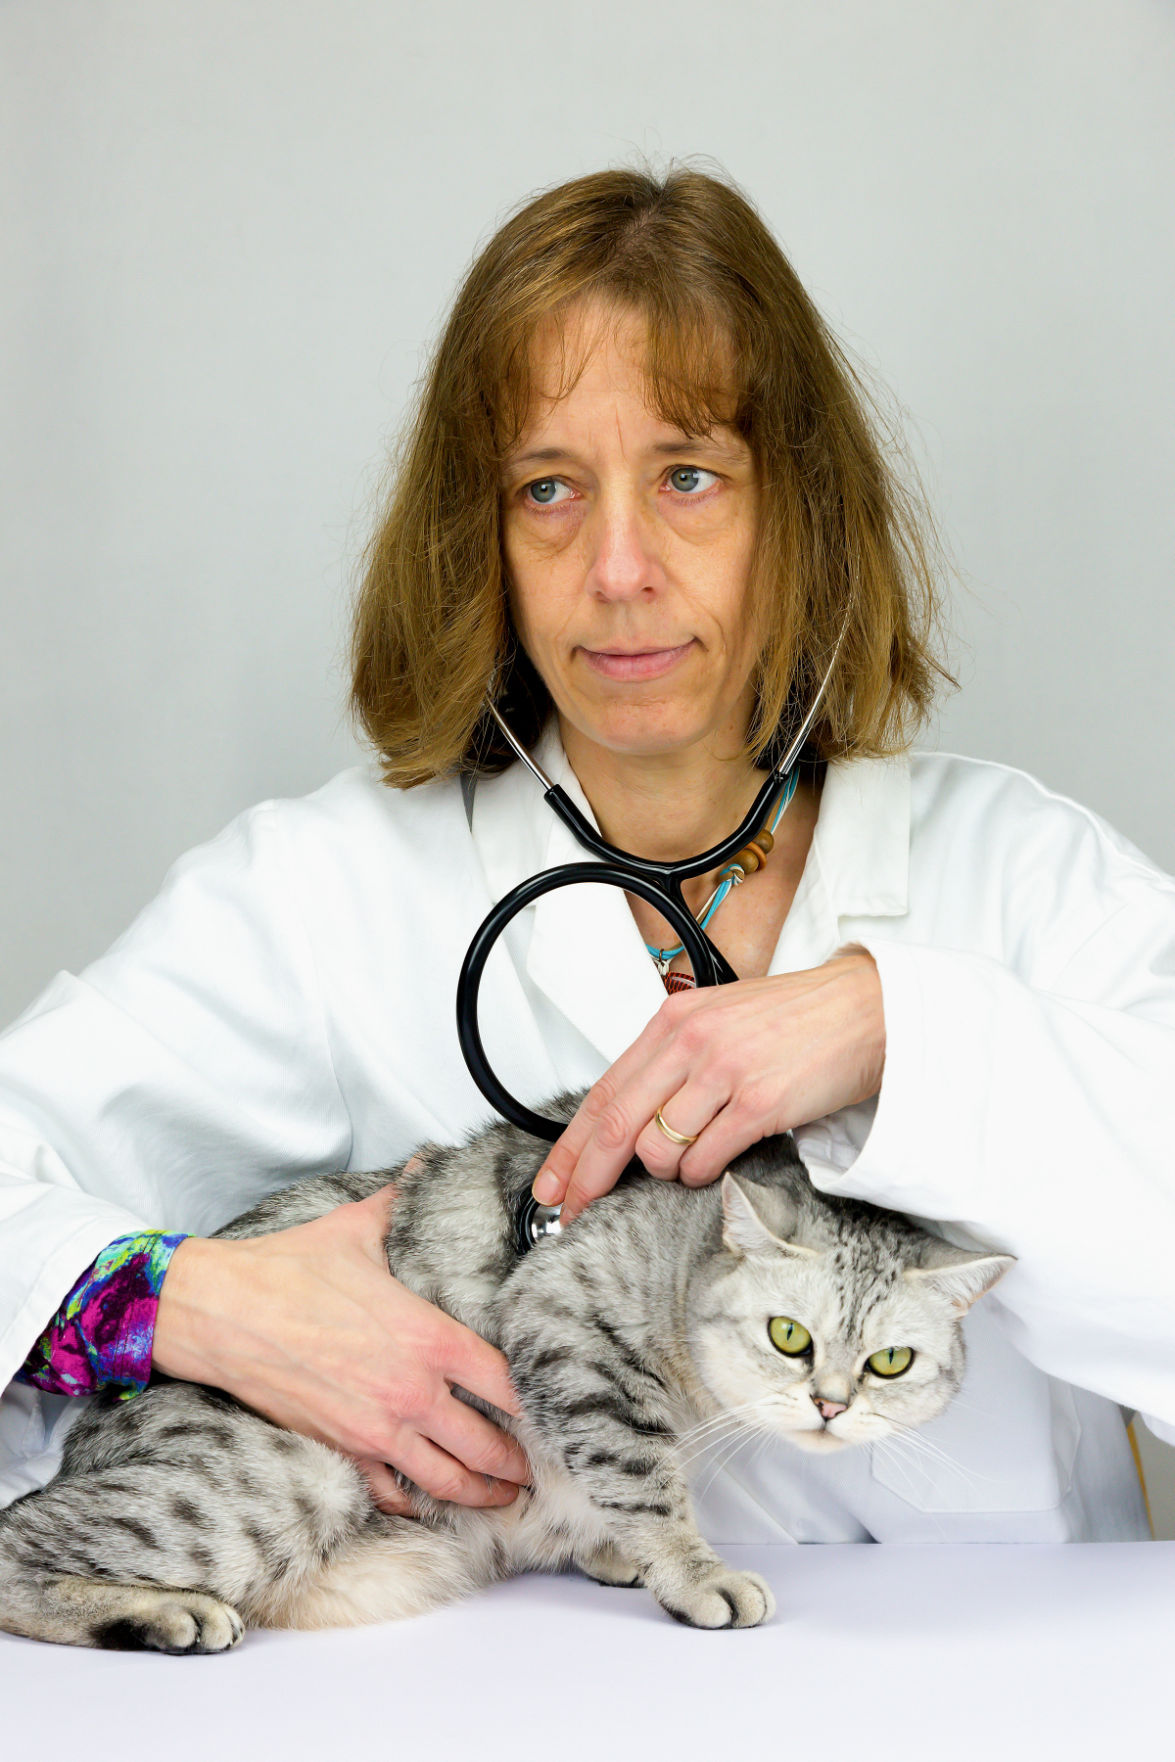 Learn what it's like to be a veterinarian Family